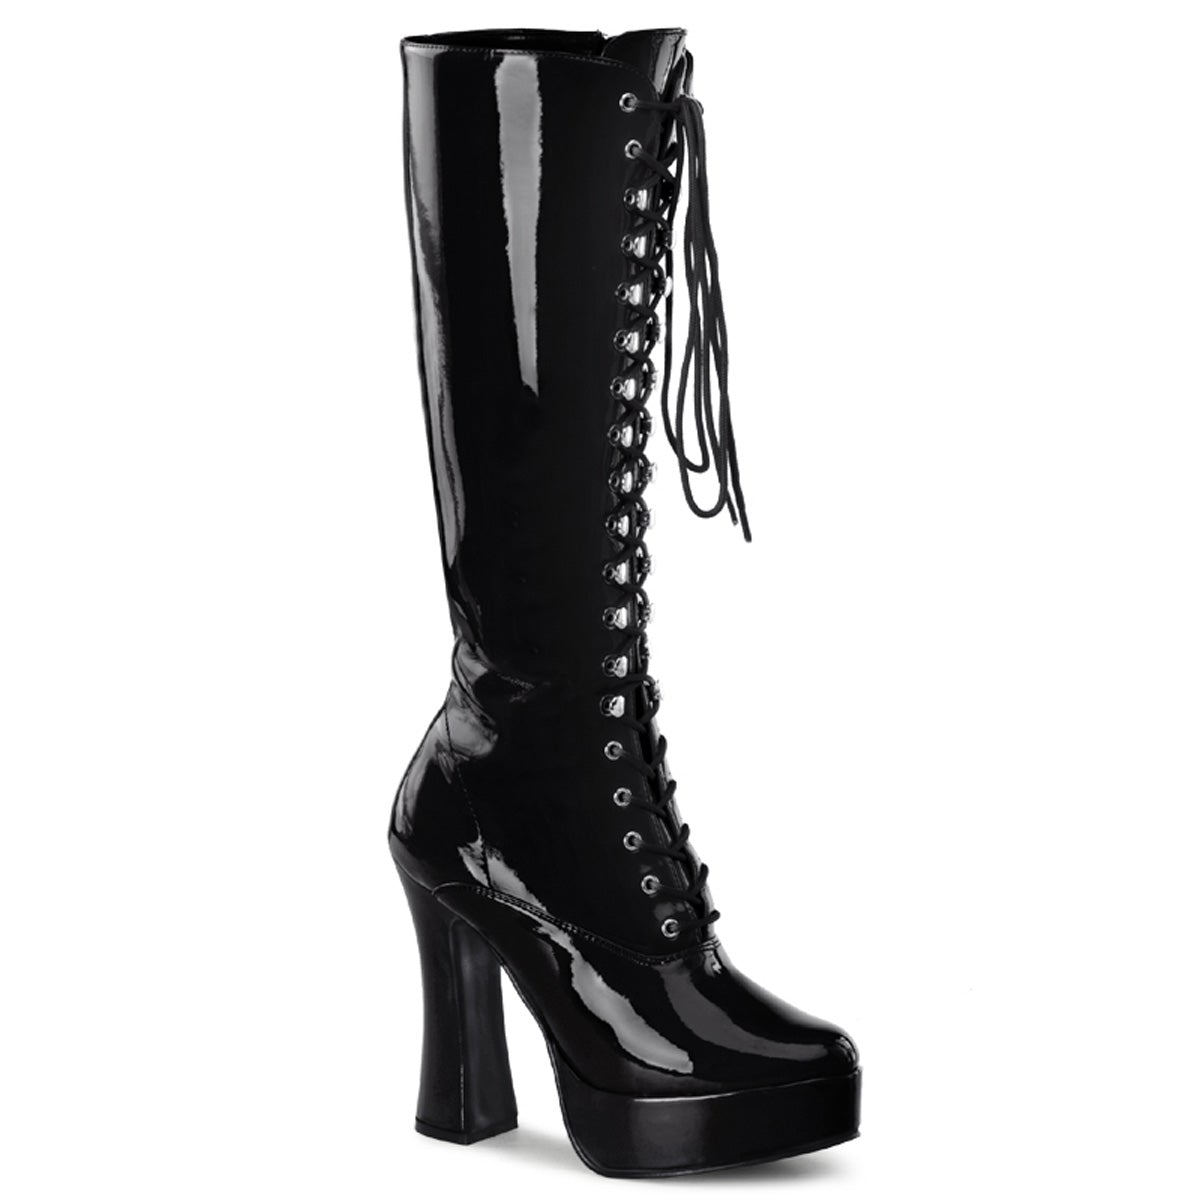 5" Electra Lace Up Knee Boot in black patent, right side view.